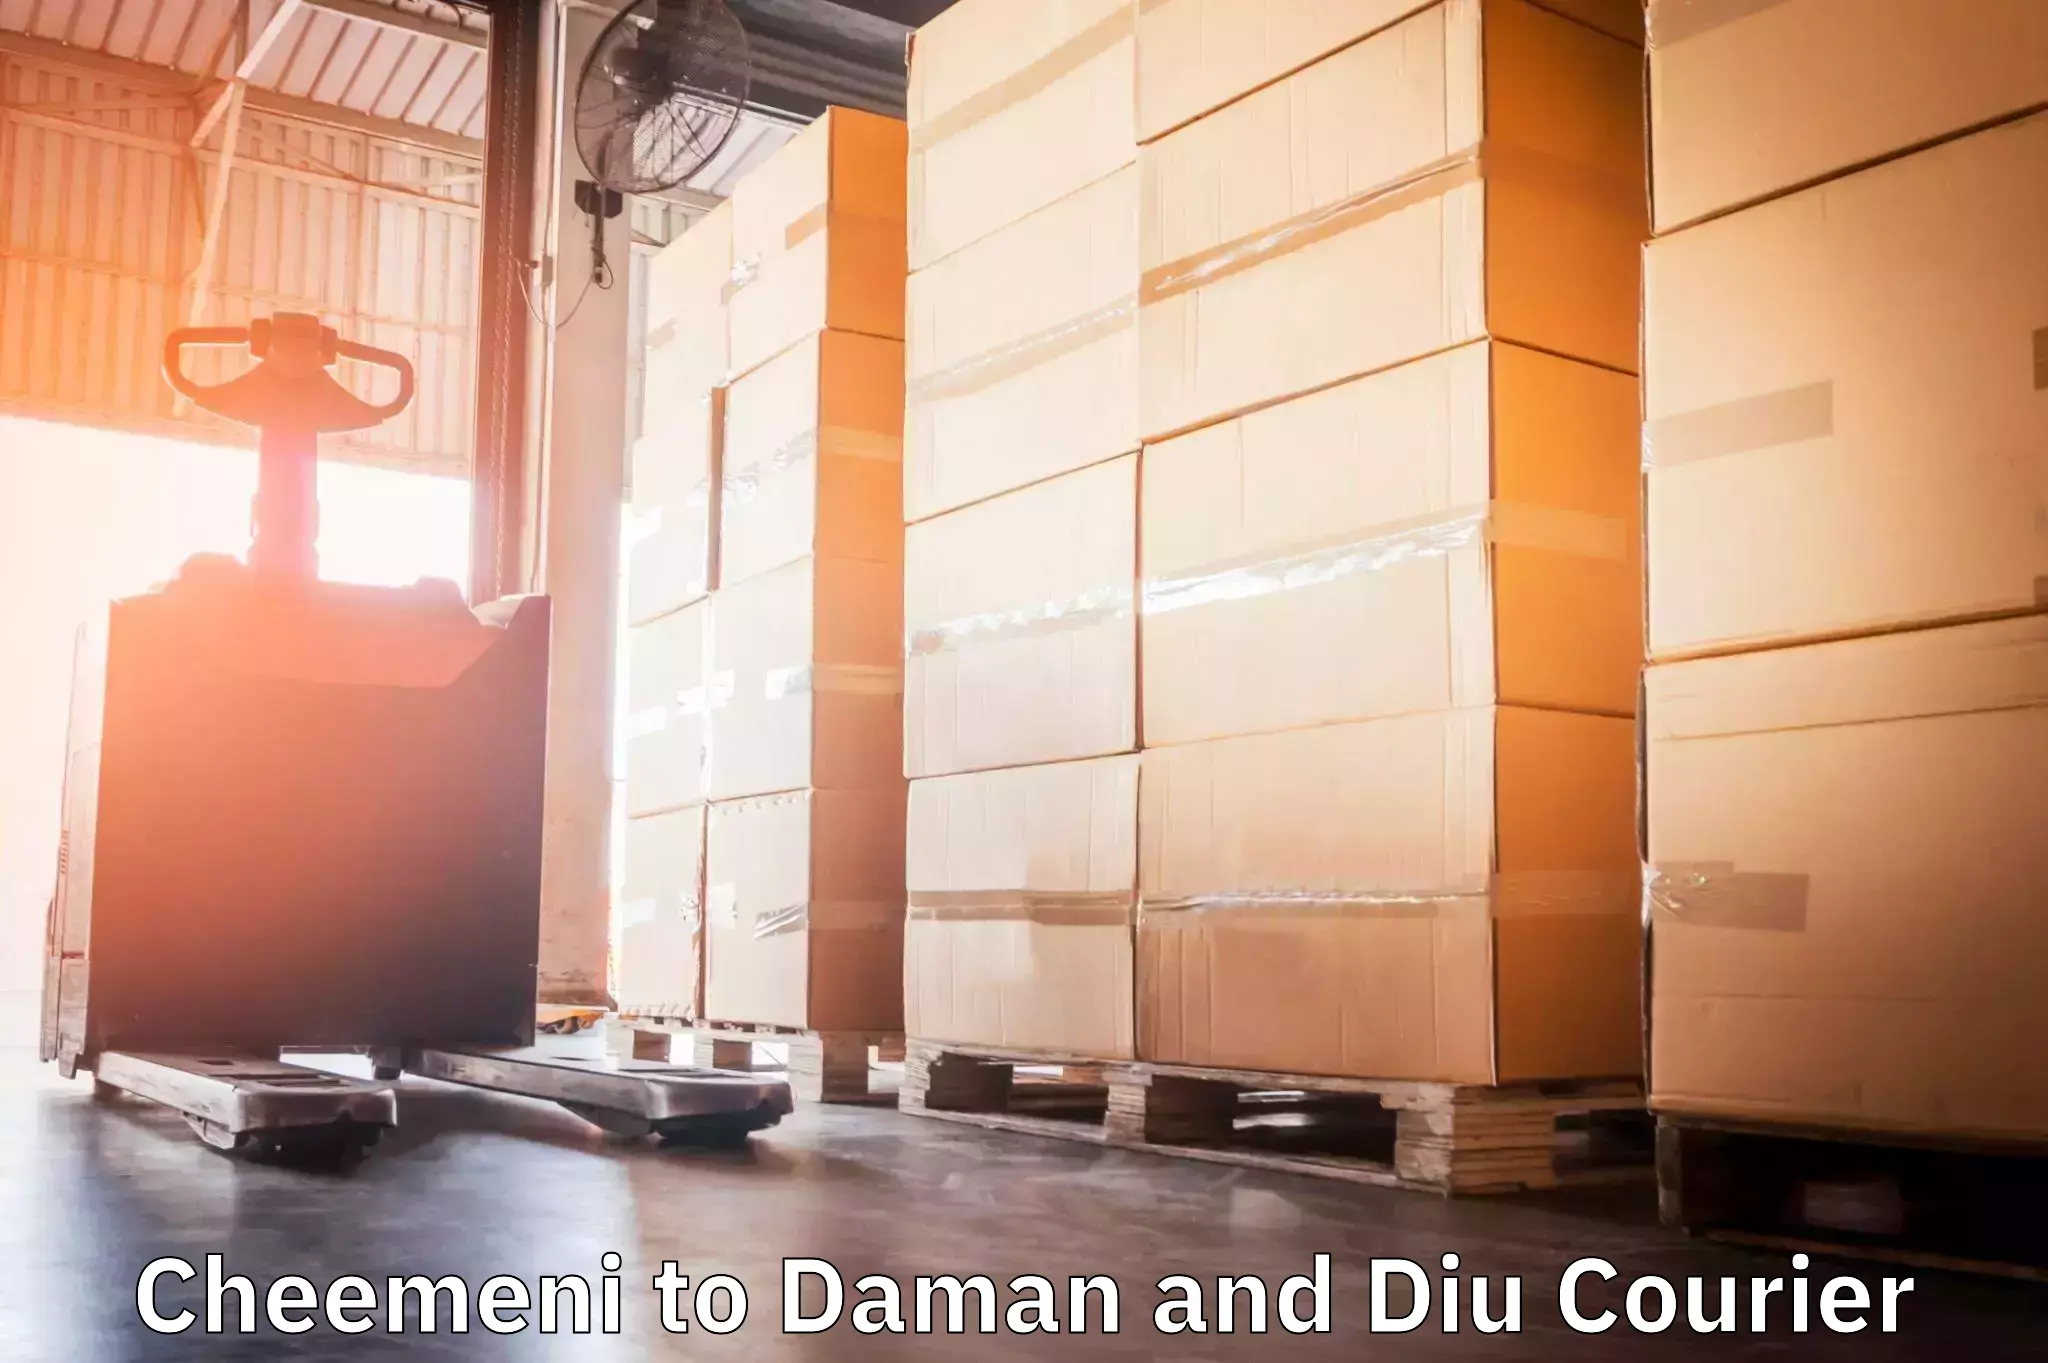 Cargo delivery service Cheemeni to Daman and Diu